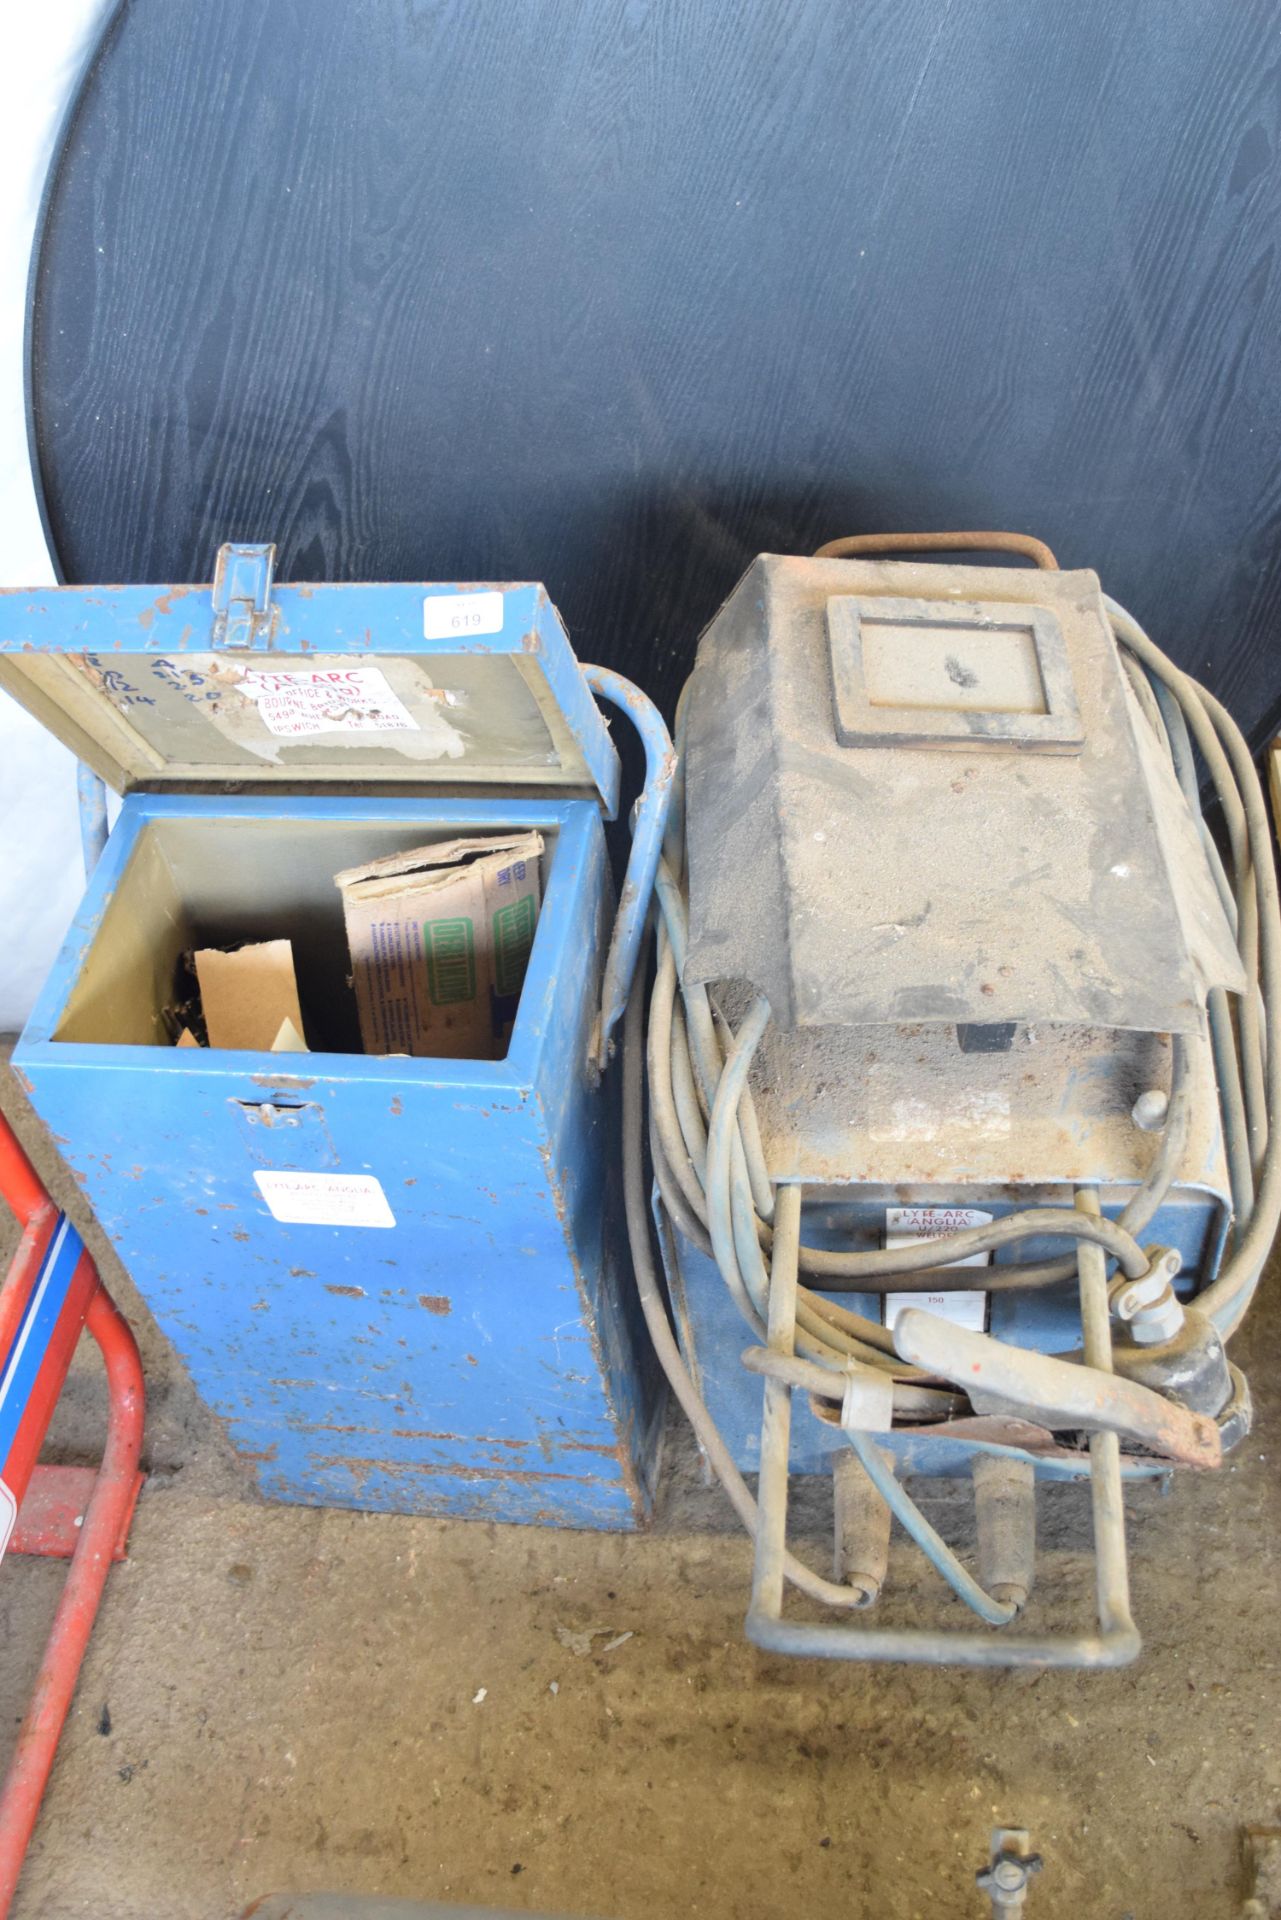 METAL STORAGE BOX CONTAINING A LARGE QTY OF WELDING RODS AND A LYTE-ARC ARC WELDER